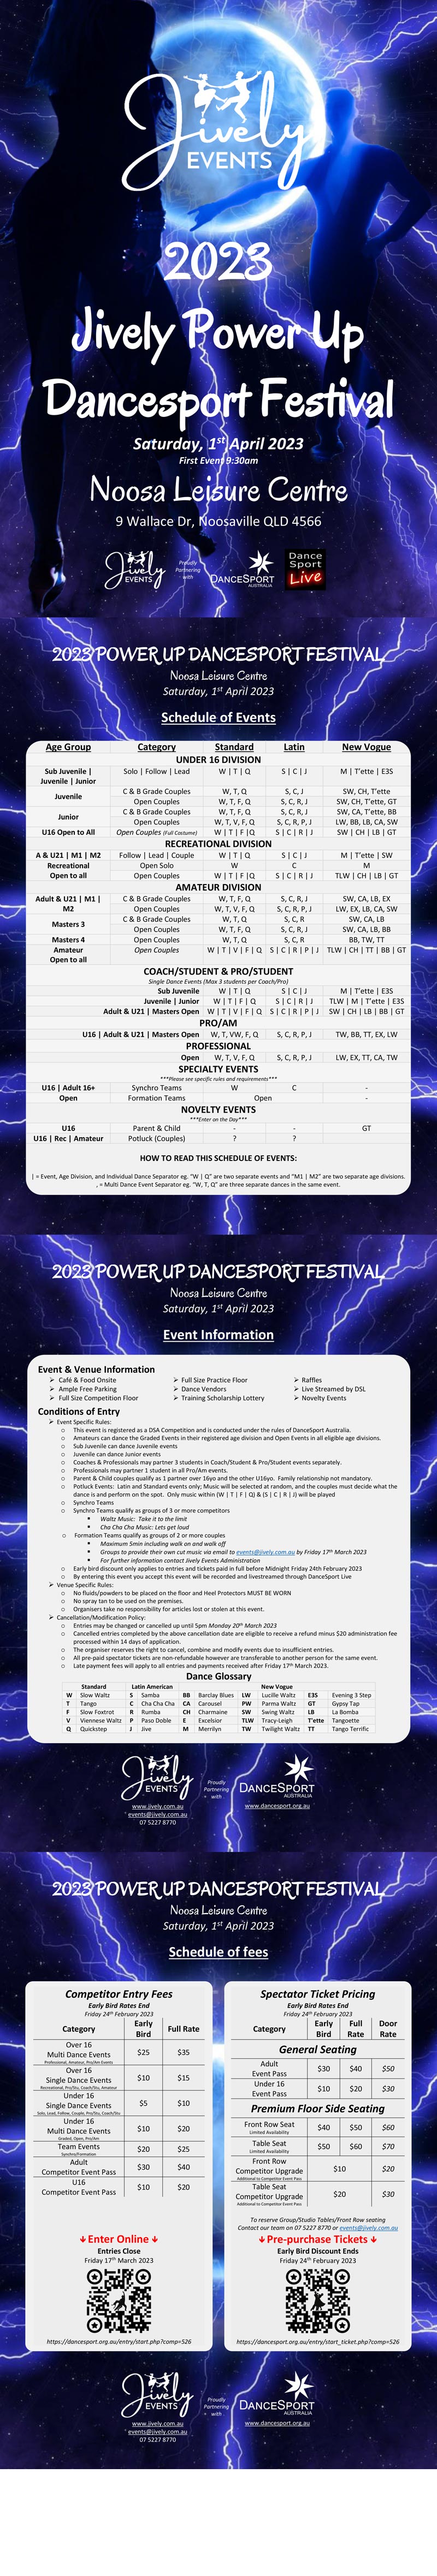 2023 Jively Power Up Festival Syllabus and information